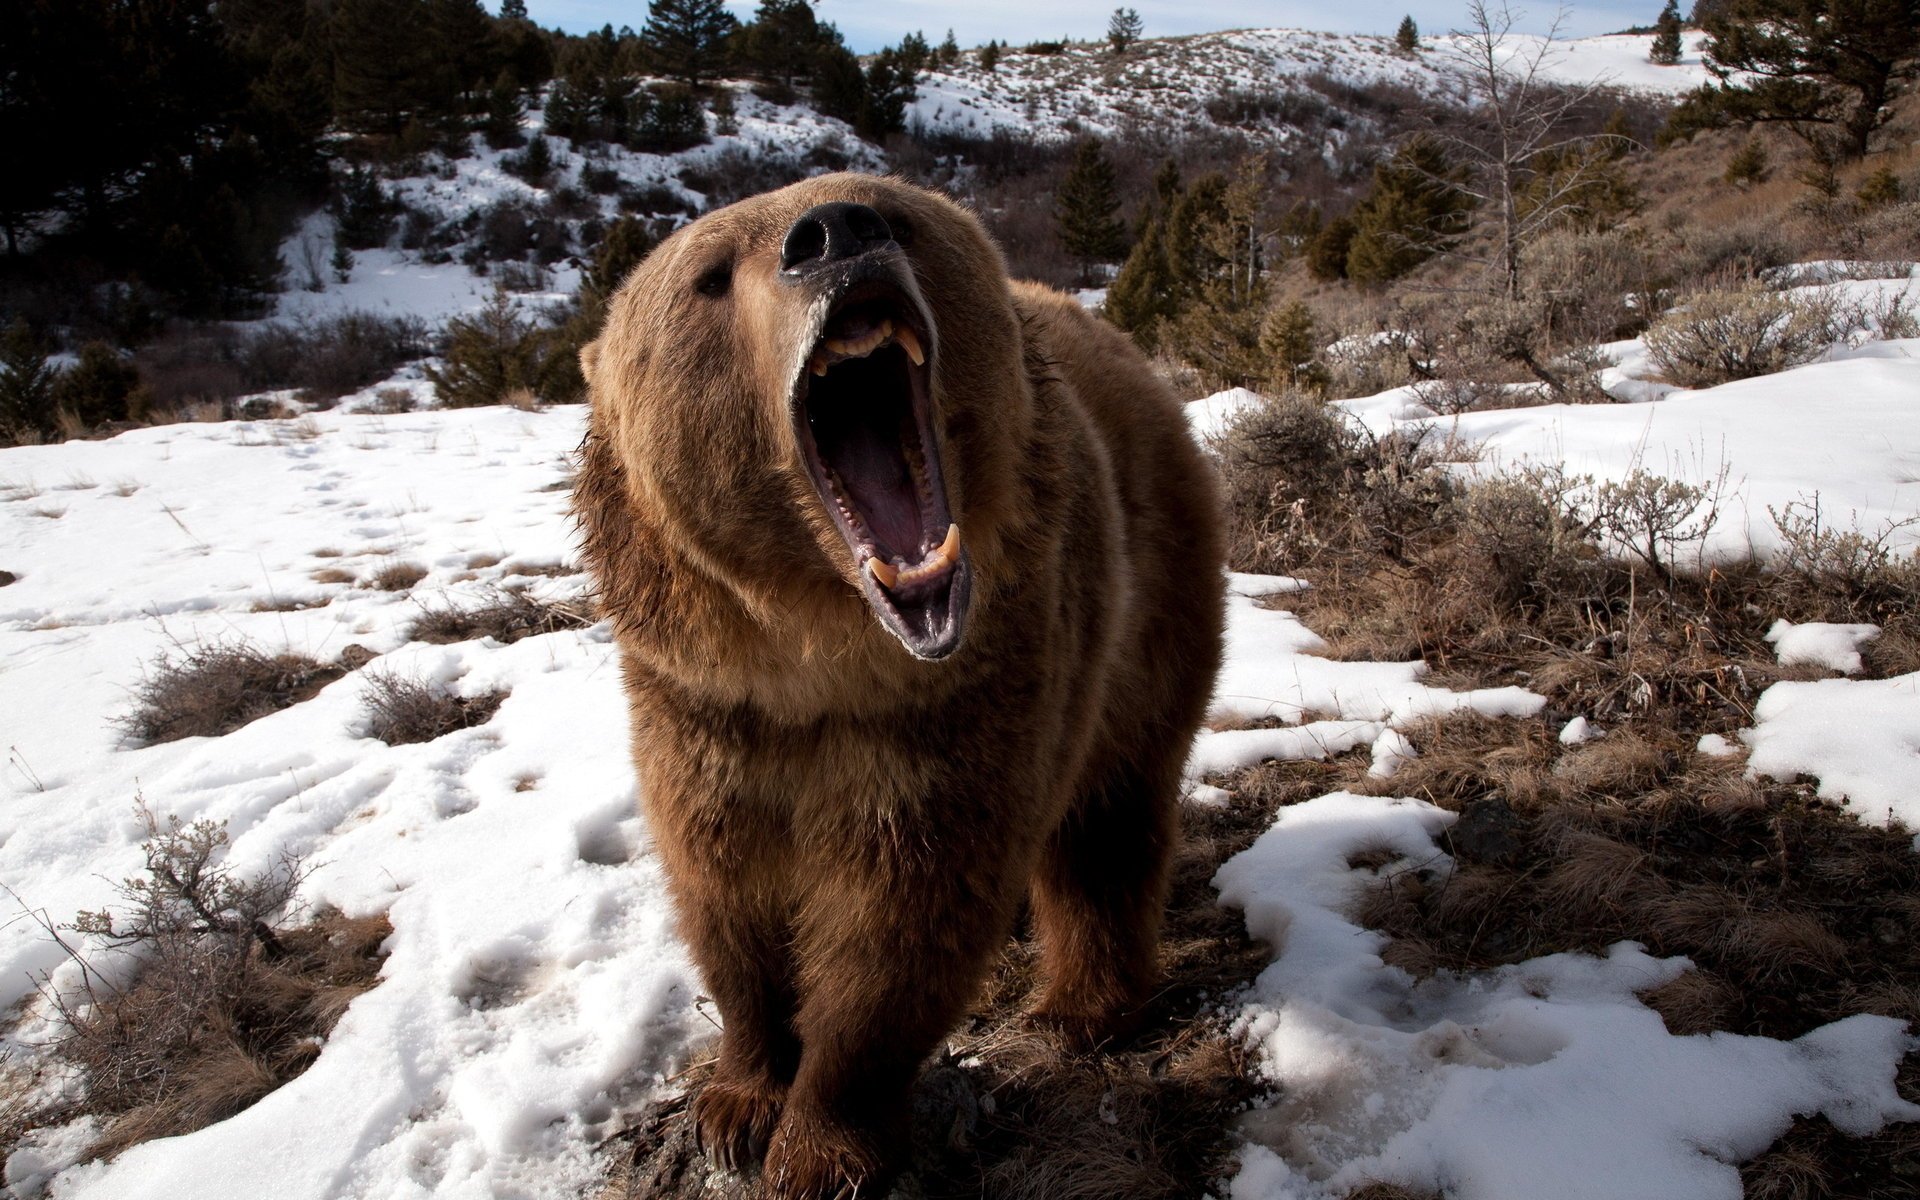 The bear opened its mouth in nature